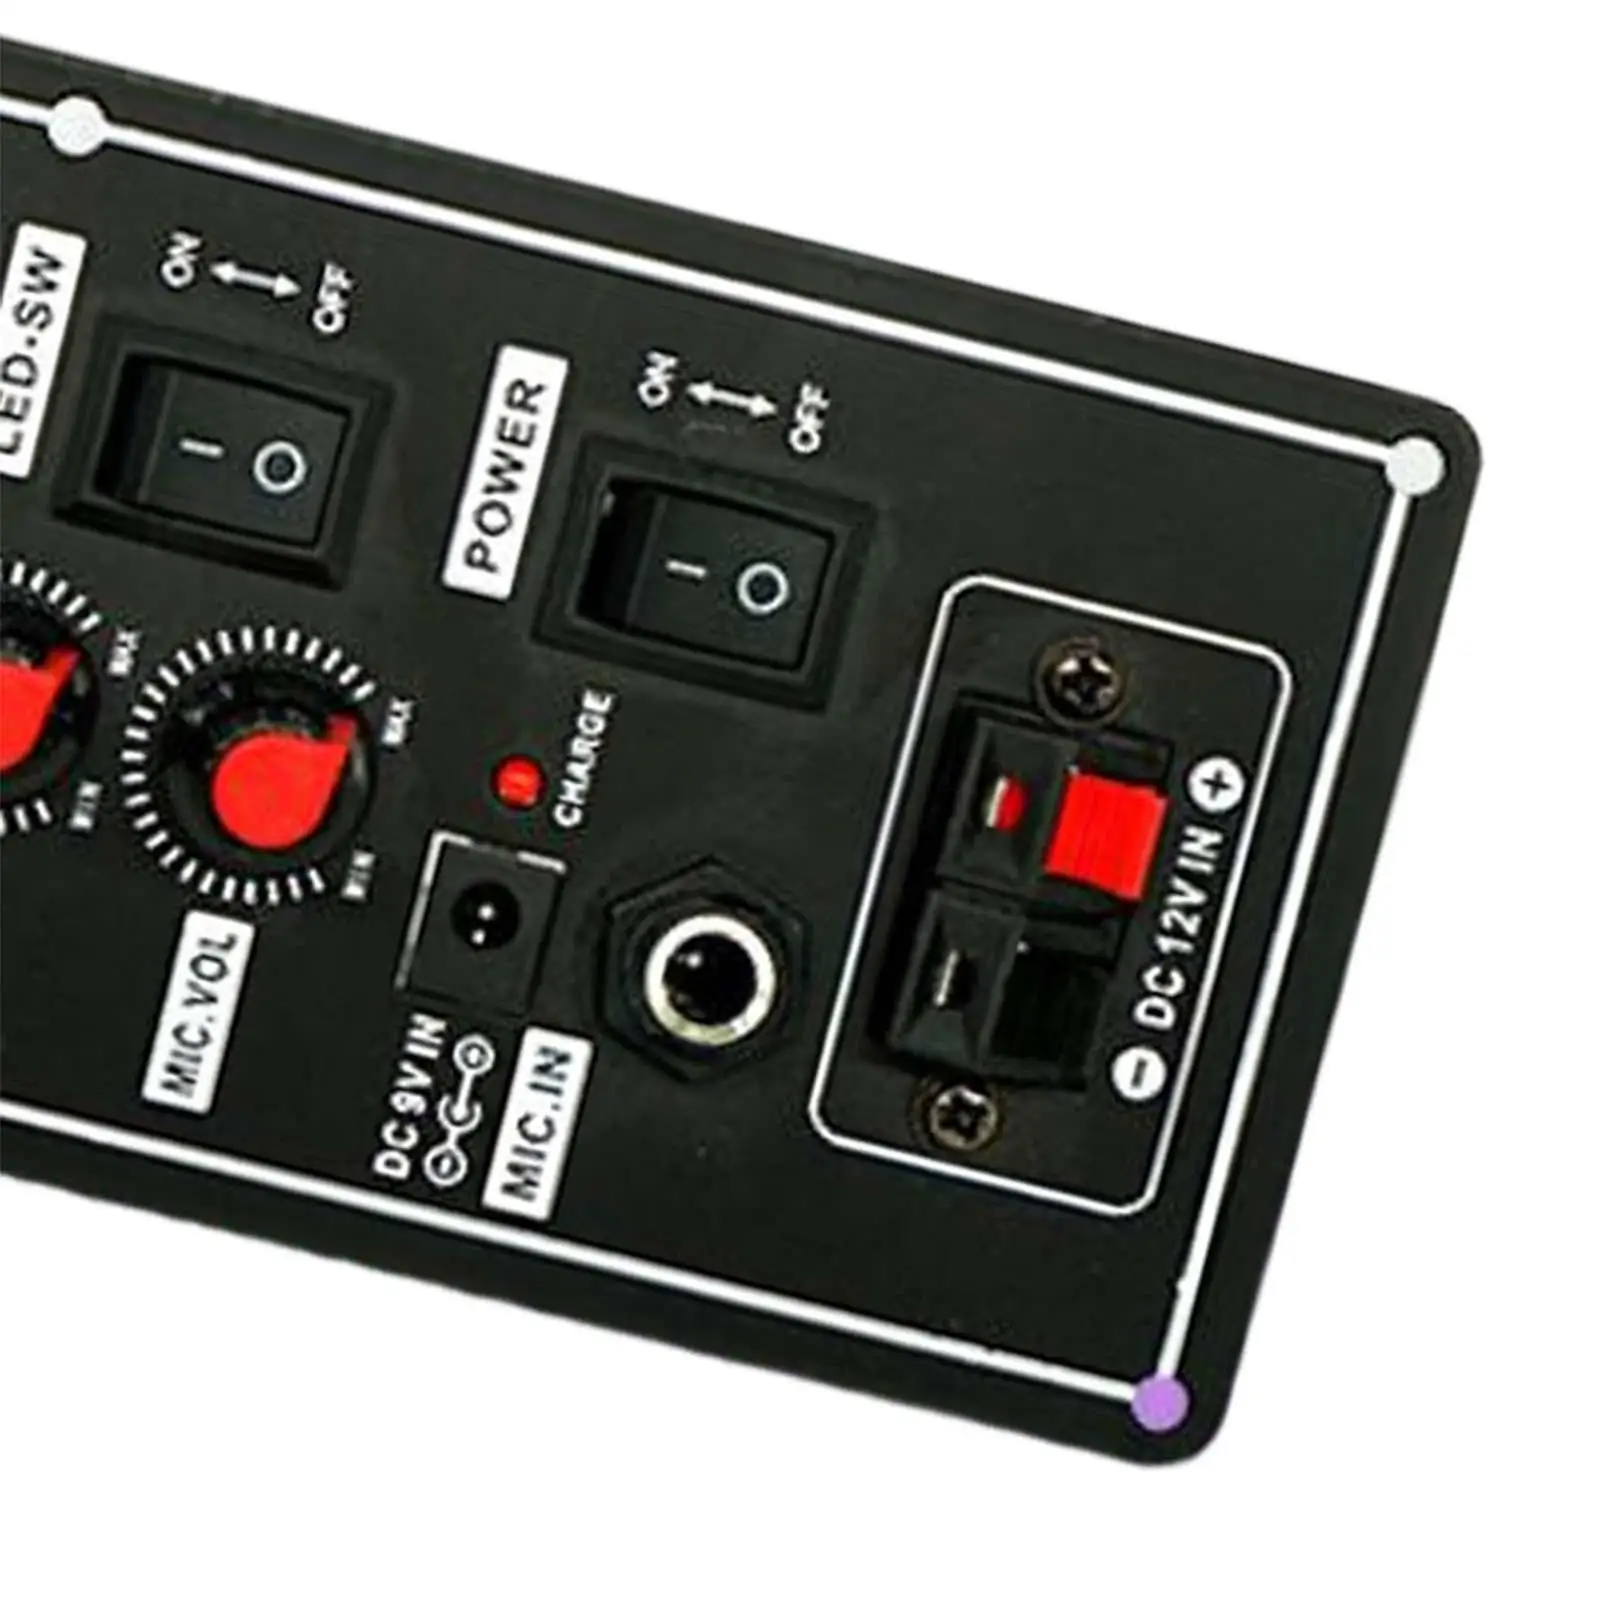 MP3 Decoding Board with Treble and Bass Adjustment Knob Support MP3/WMA/WAV/flac/ape Audio Receiver Module Easy to Operate